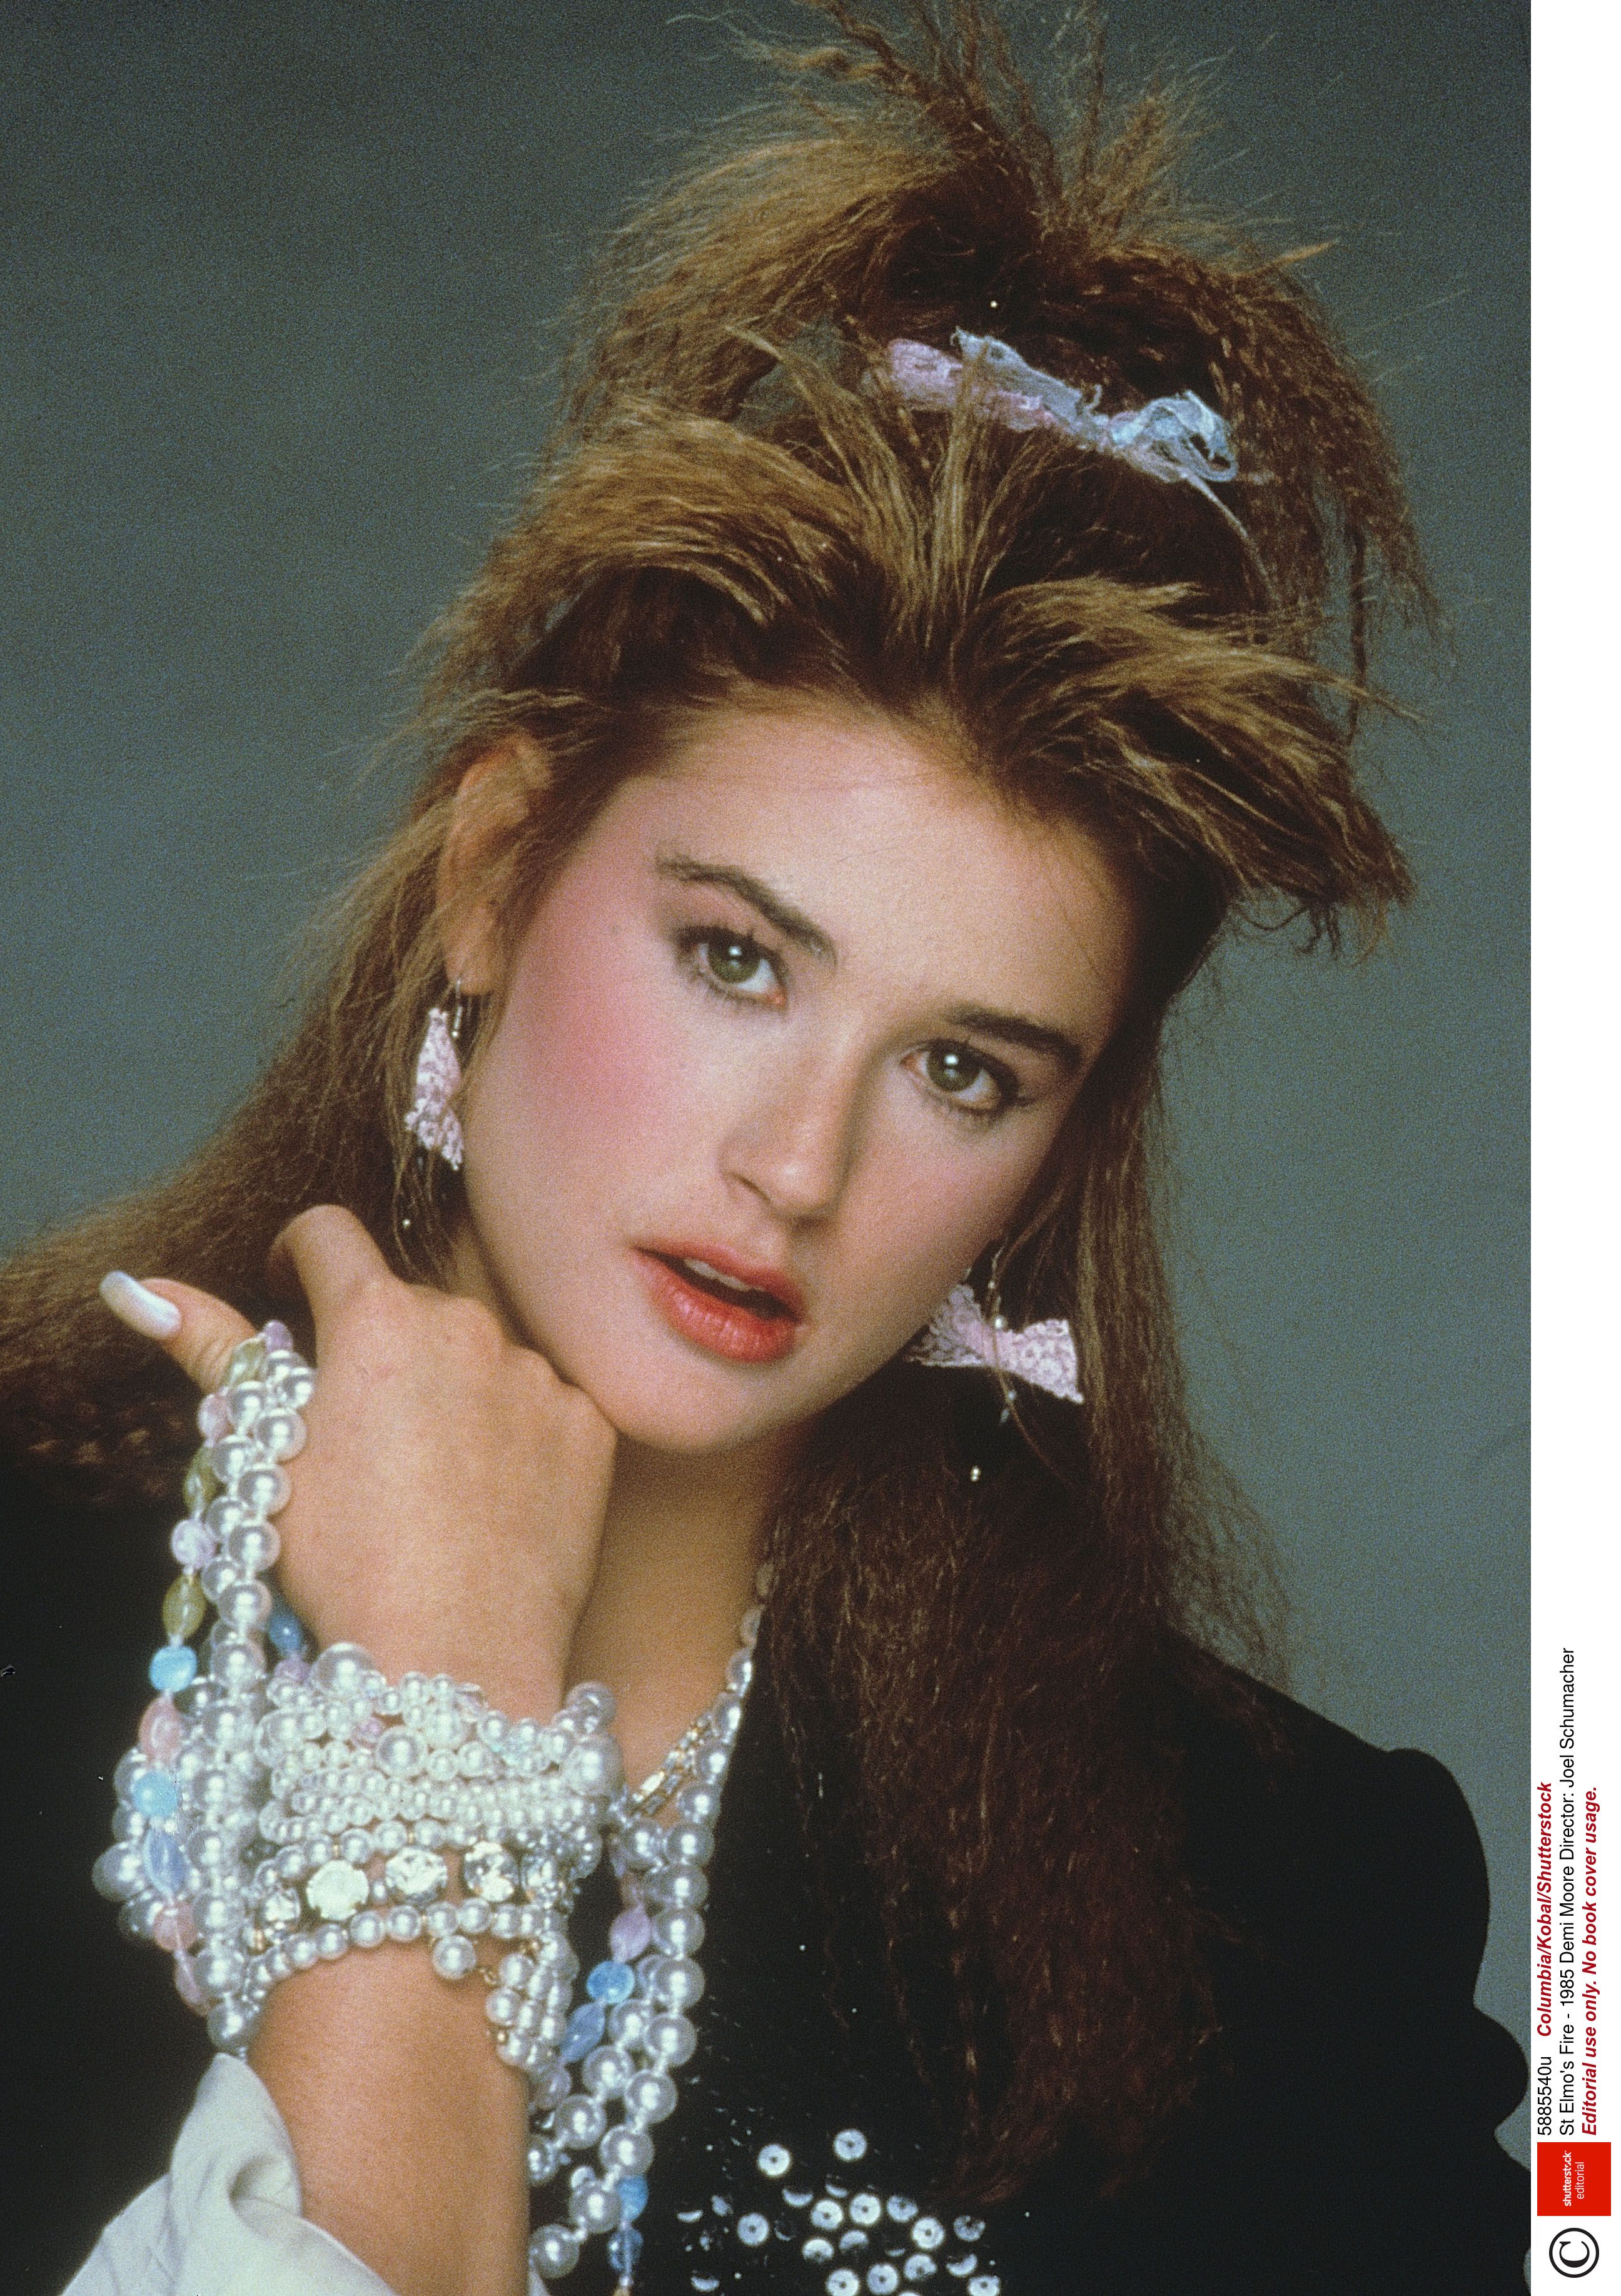 10 fashions that are so 80s it's silly – Smiffys Australia